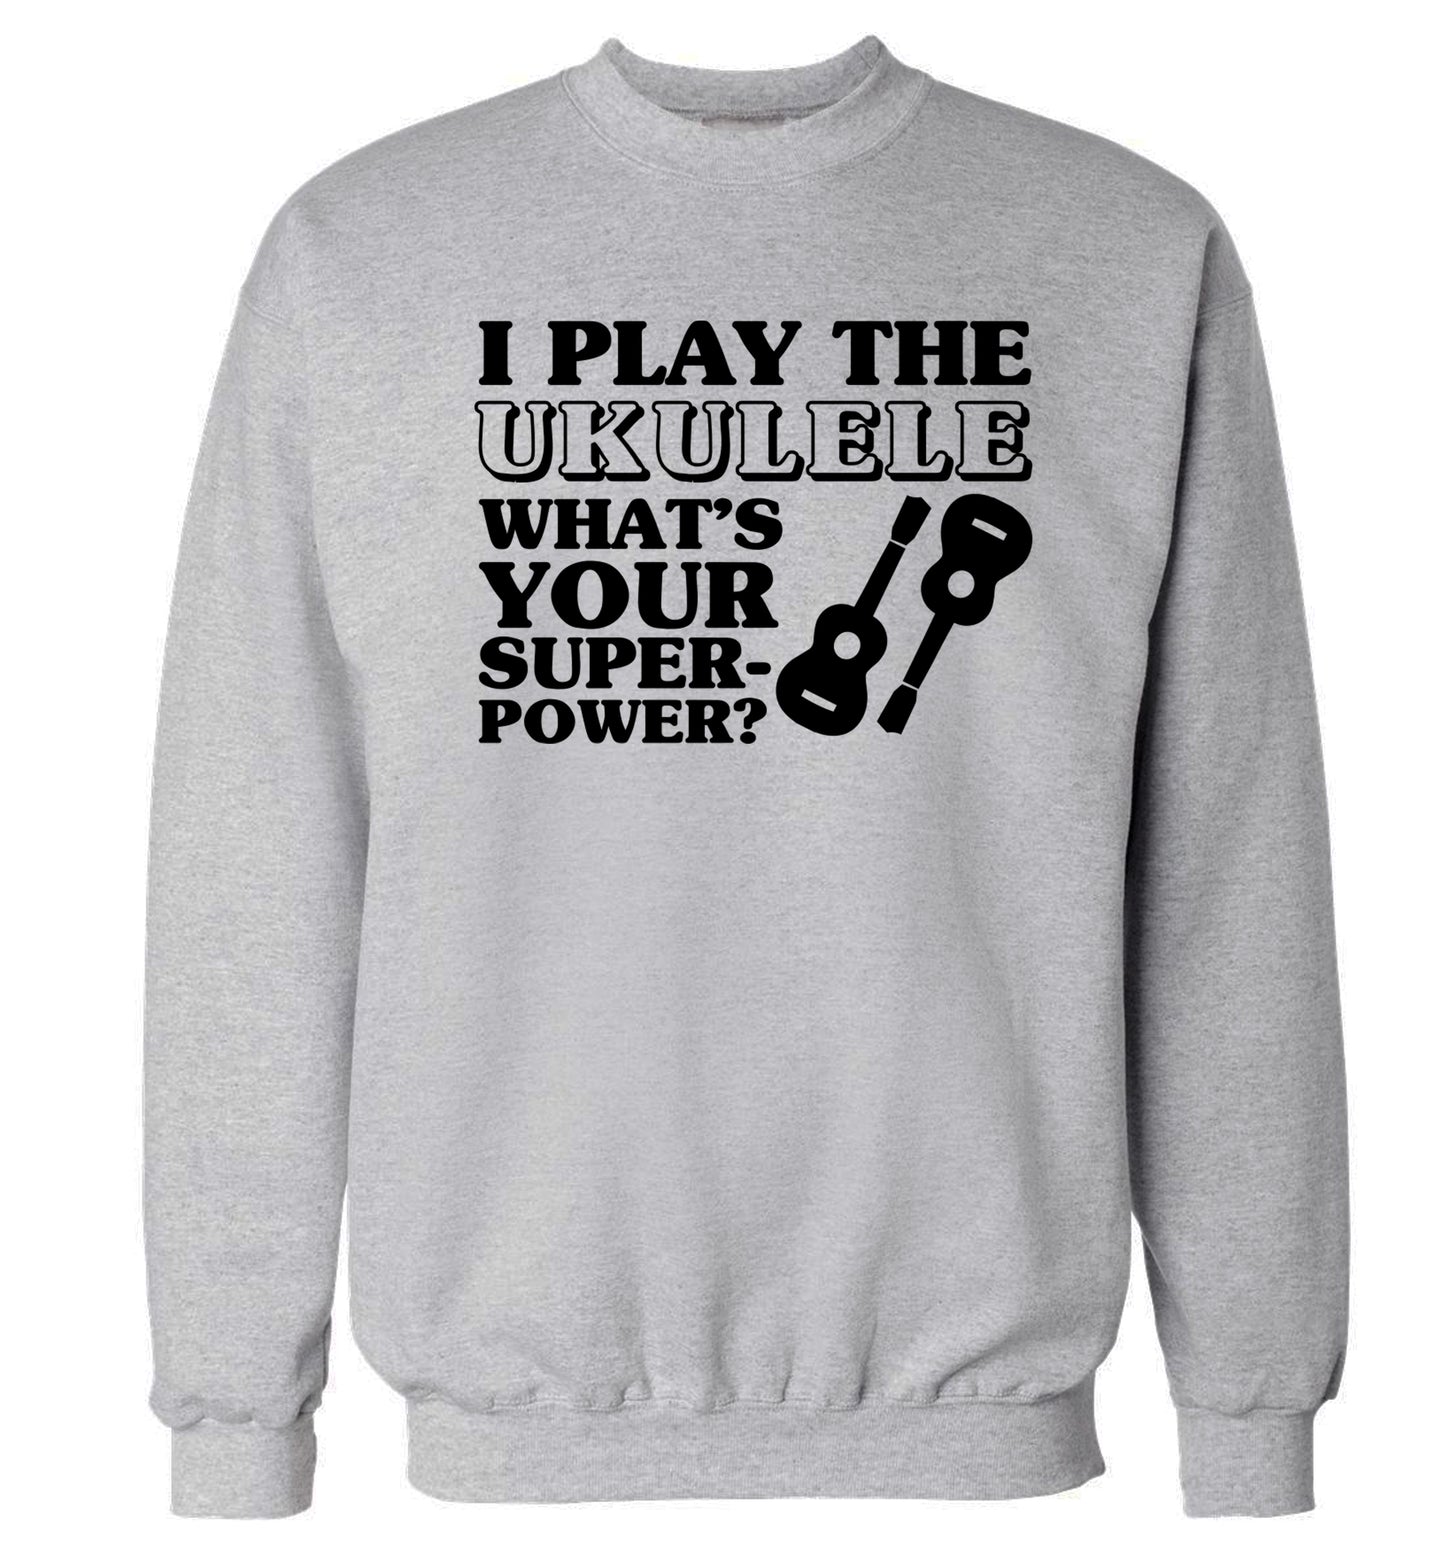 I play the ukulele what's your superpower? Adult's unisex grey Sweater 2XL